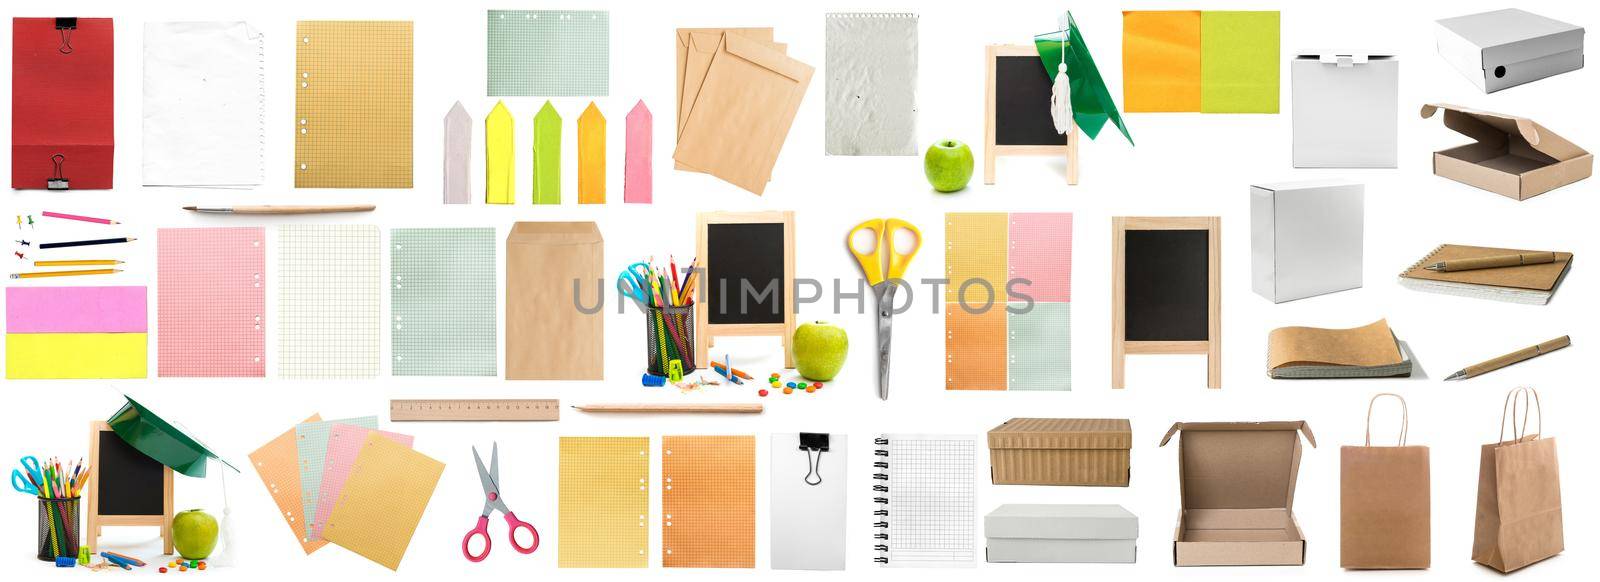 collage of different colorful childish stationery isolated on white background